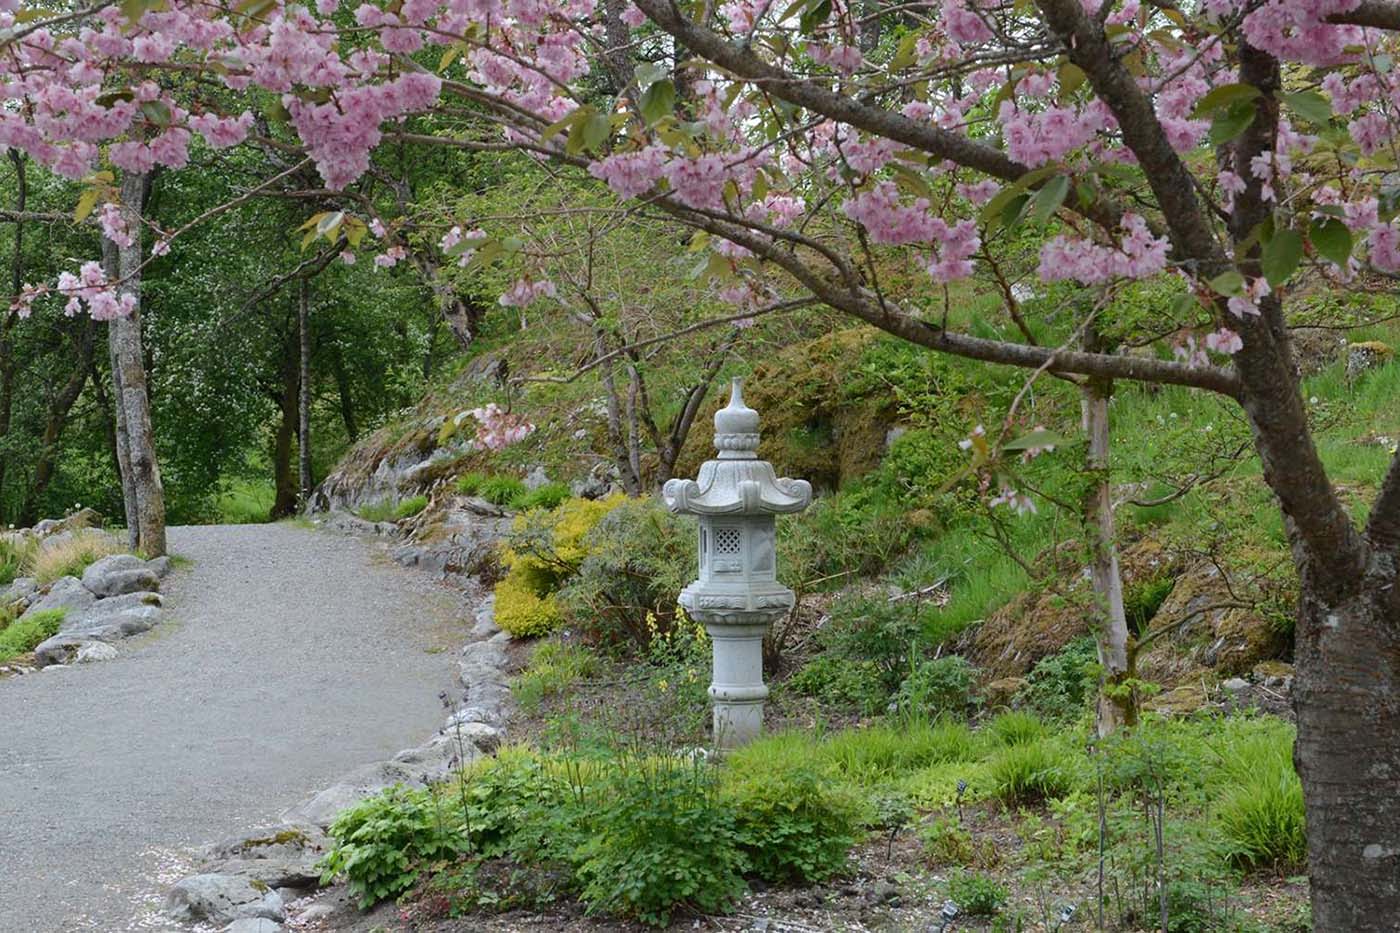 Bergen's Botanical Garden: A Tranquil Oasis in the City